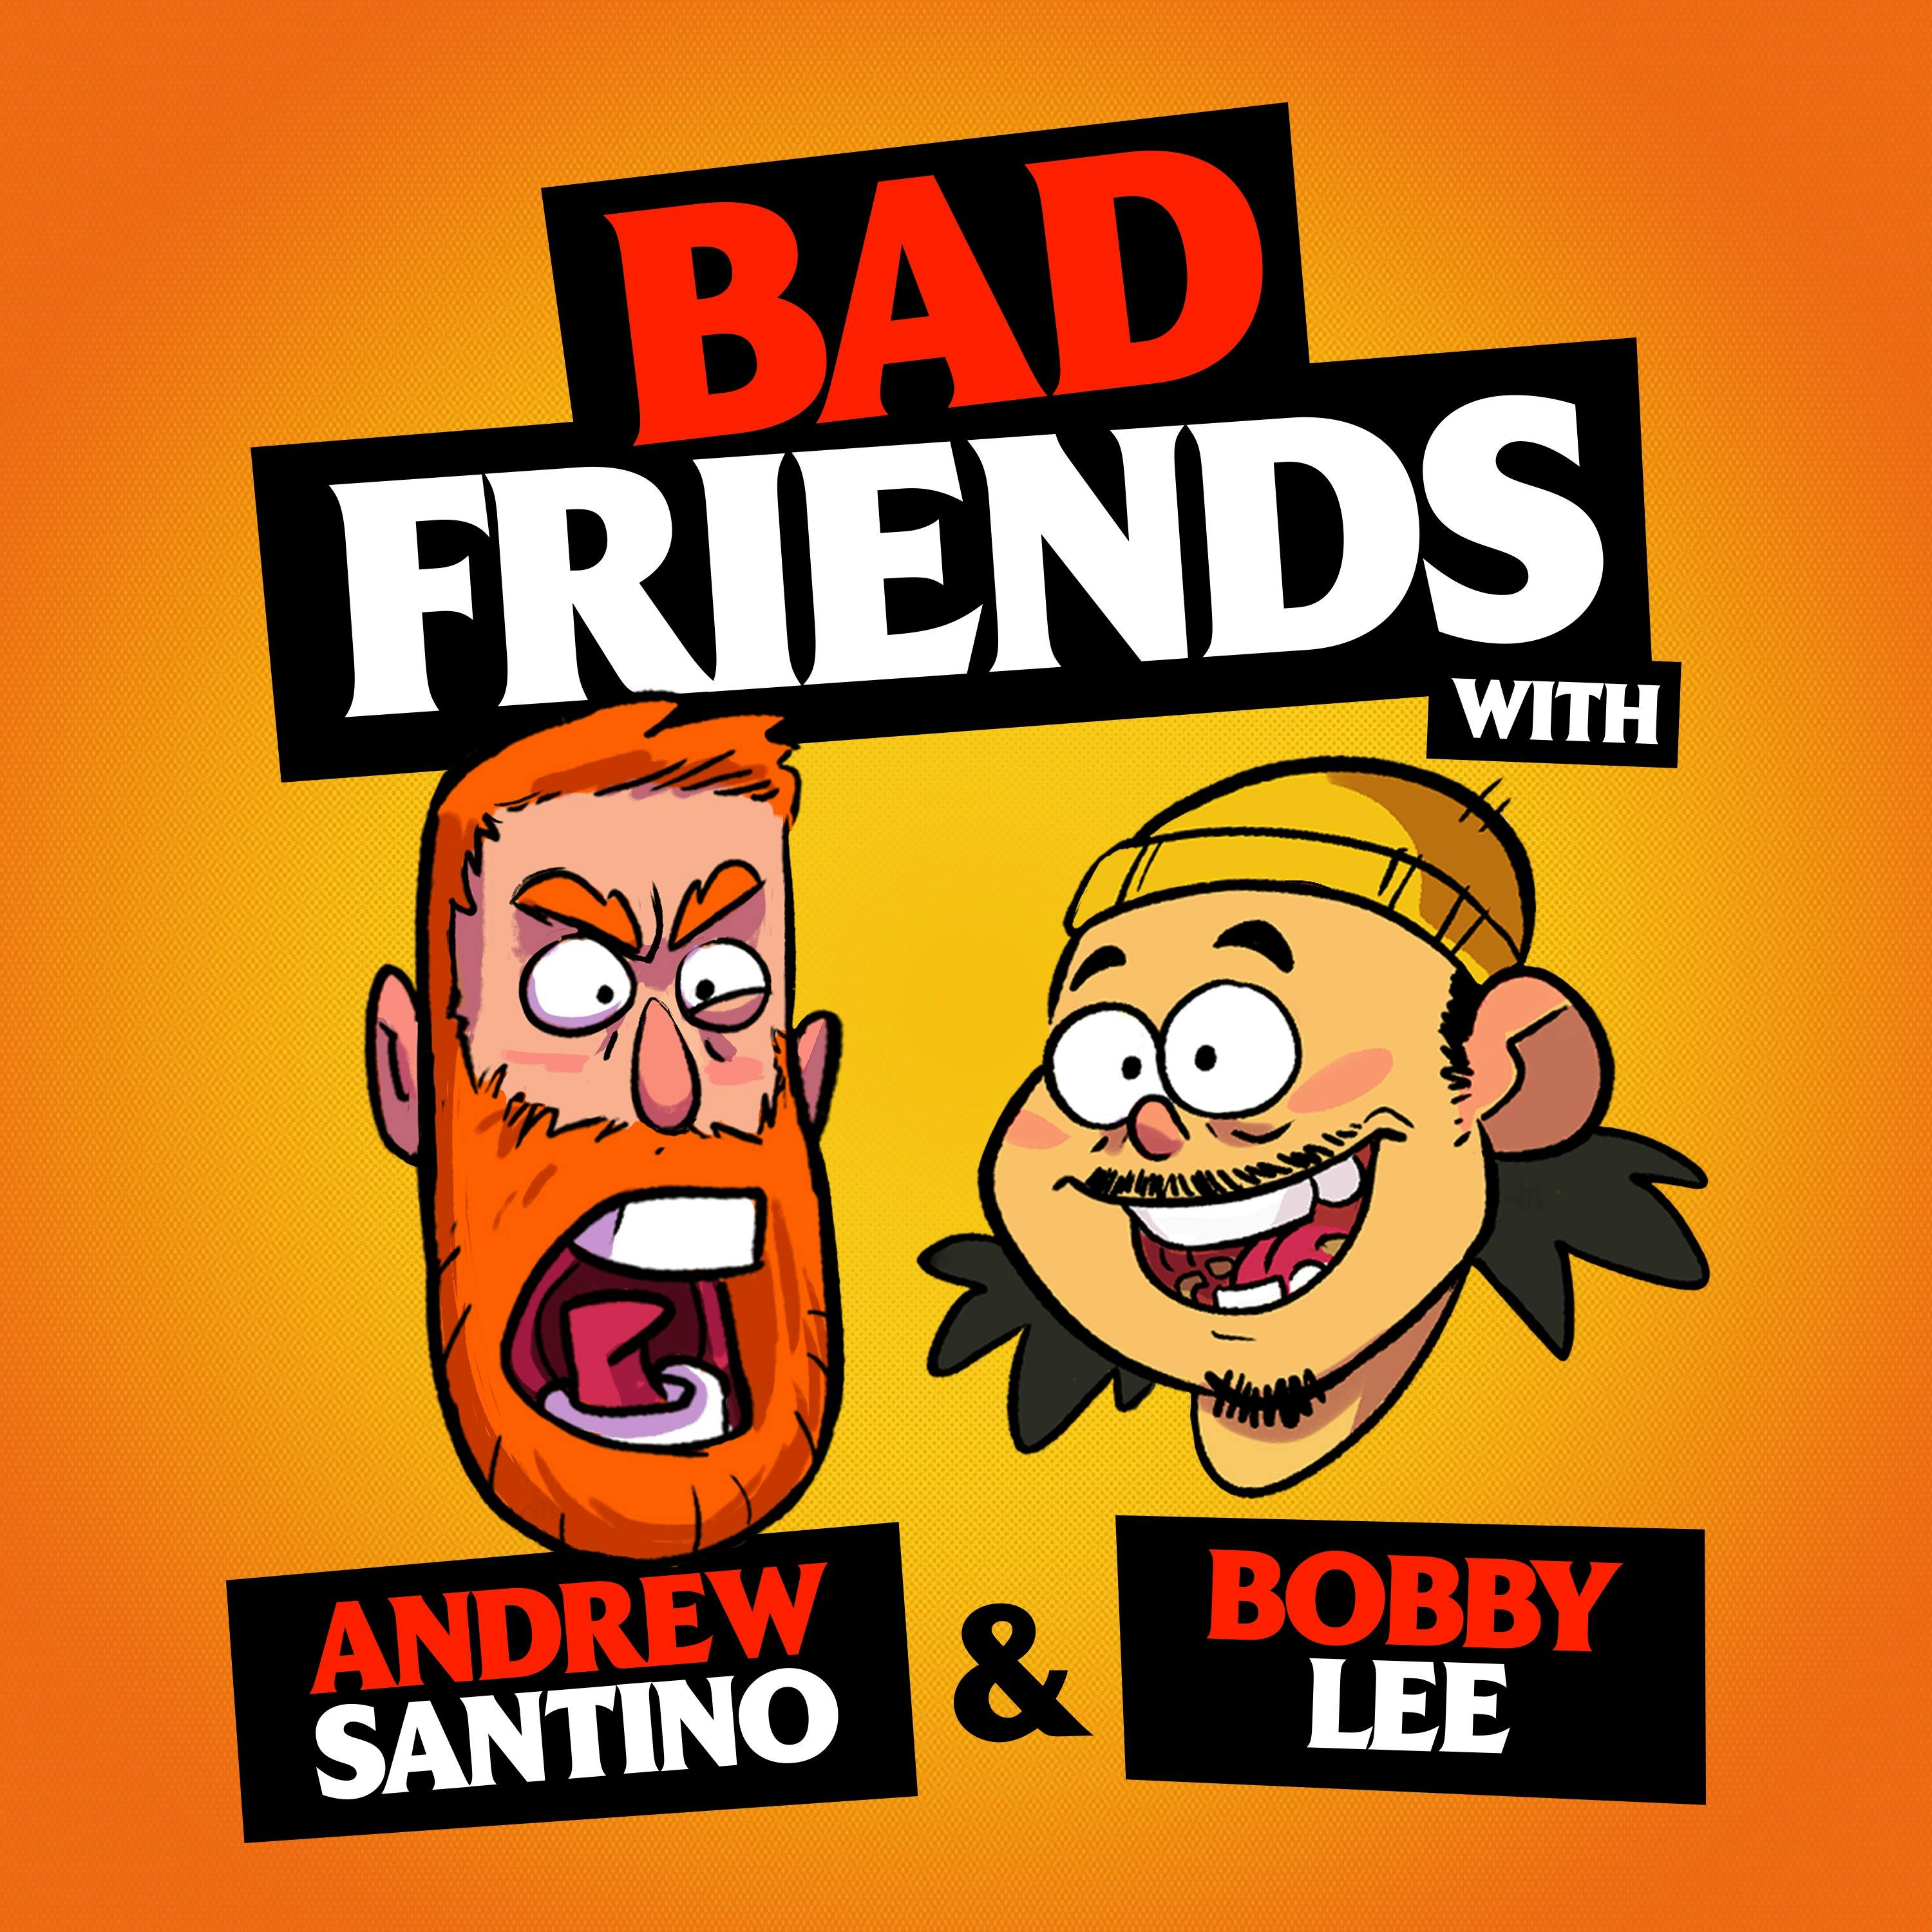 Get Out of This World! by Andrew Santino and Bobby Lee